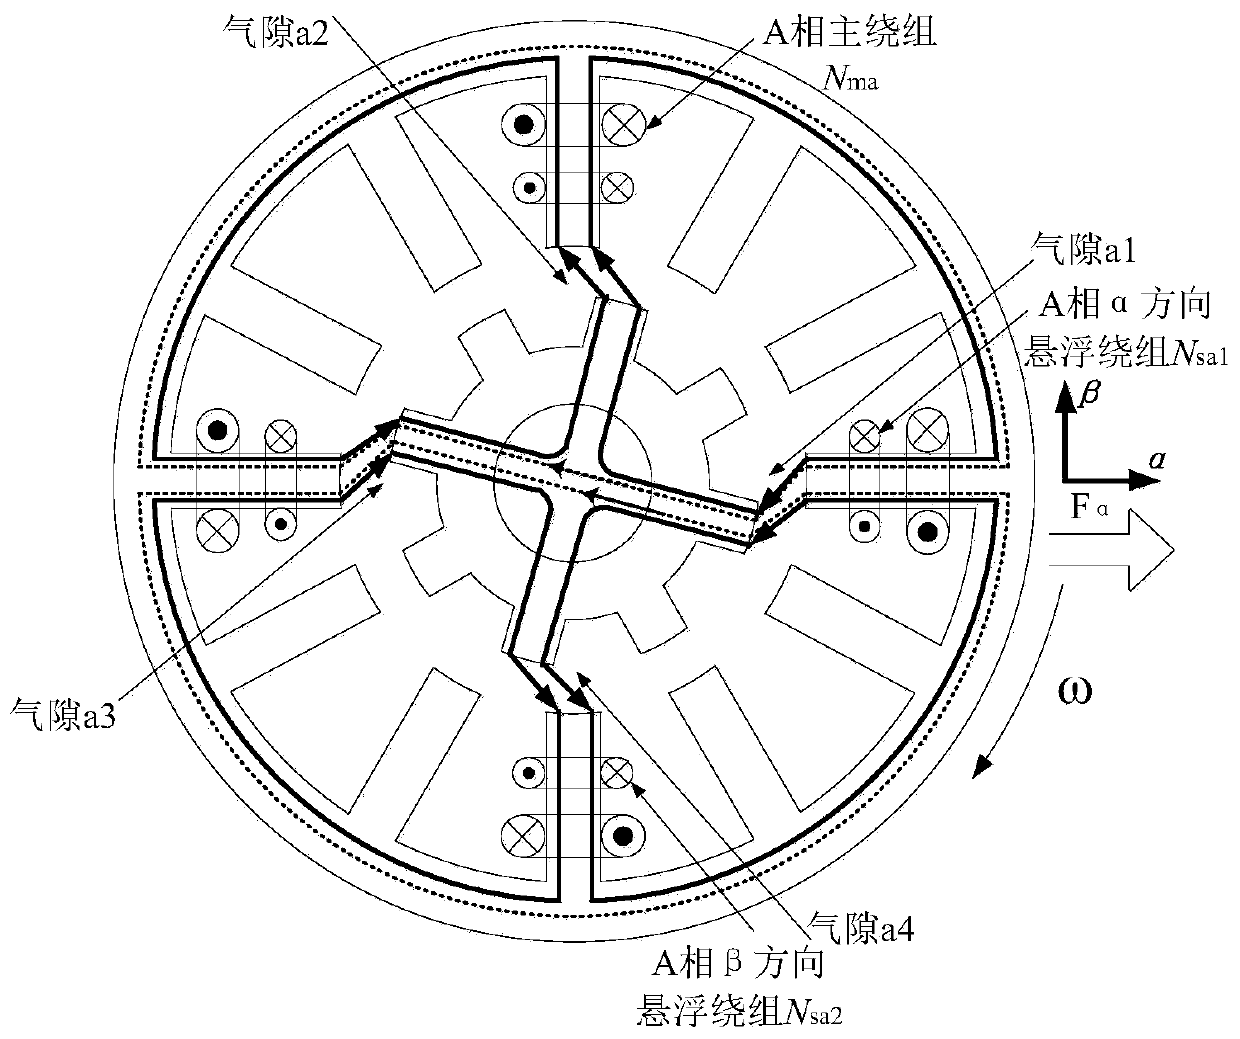 BSRM Maxwell stress analysis modeling method for non-overlapping region of stator and rotor